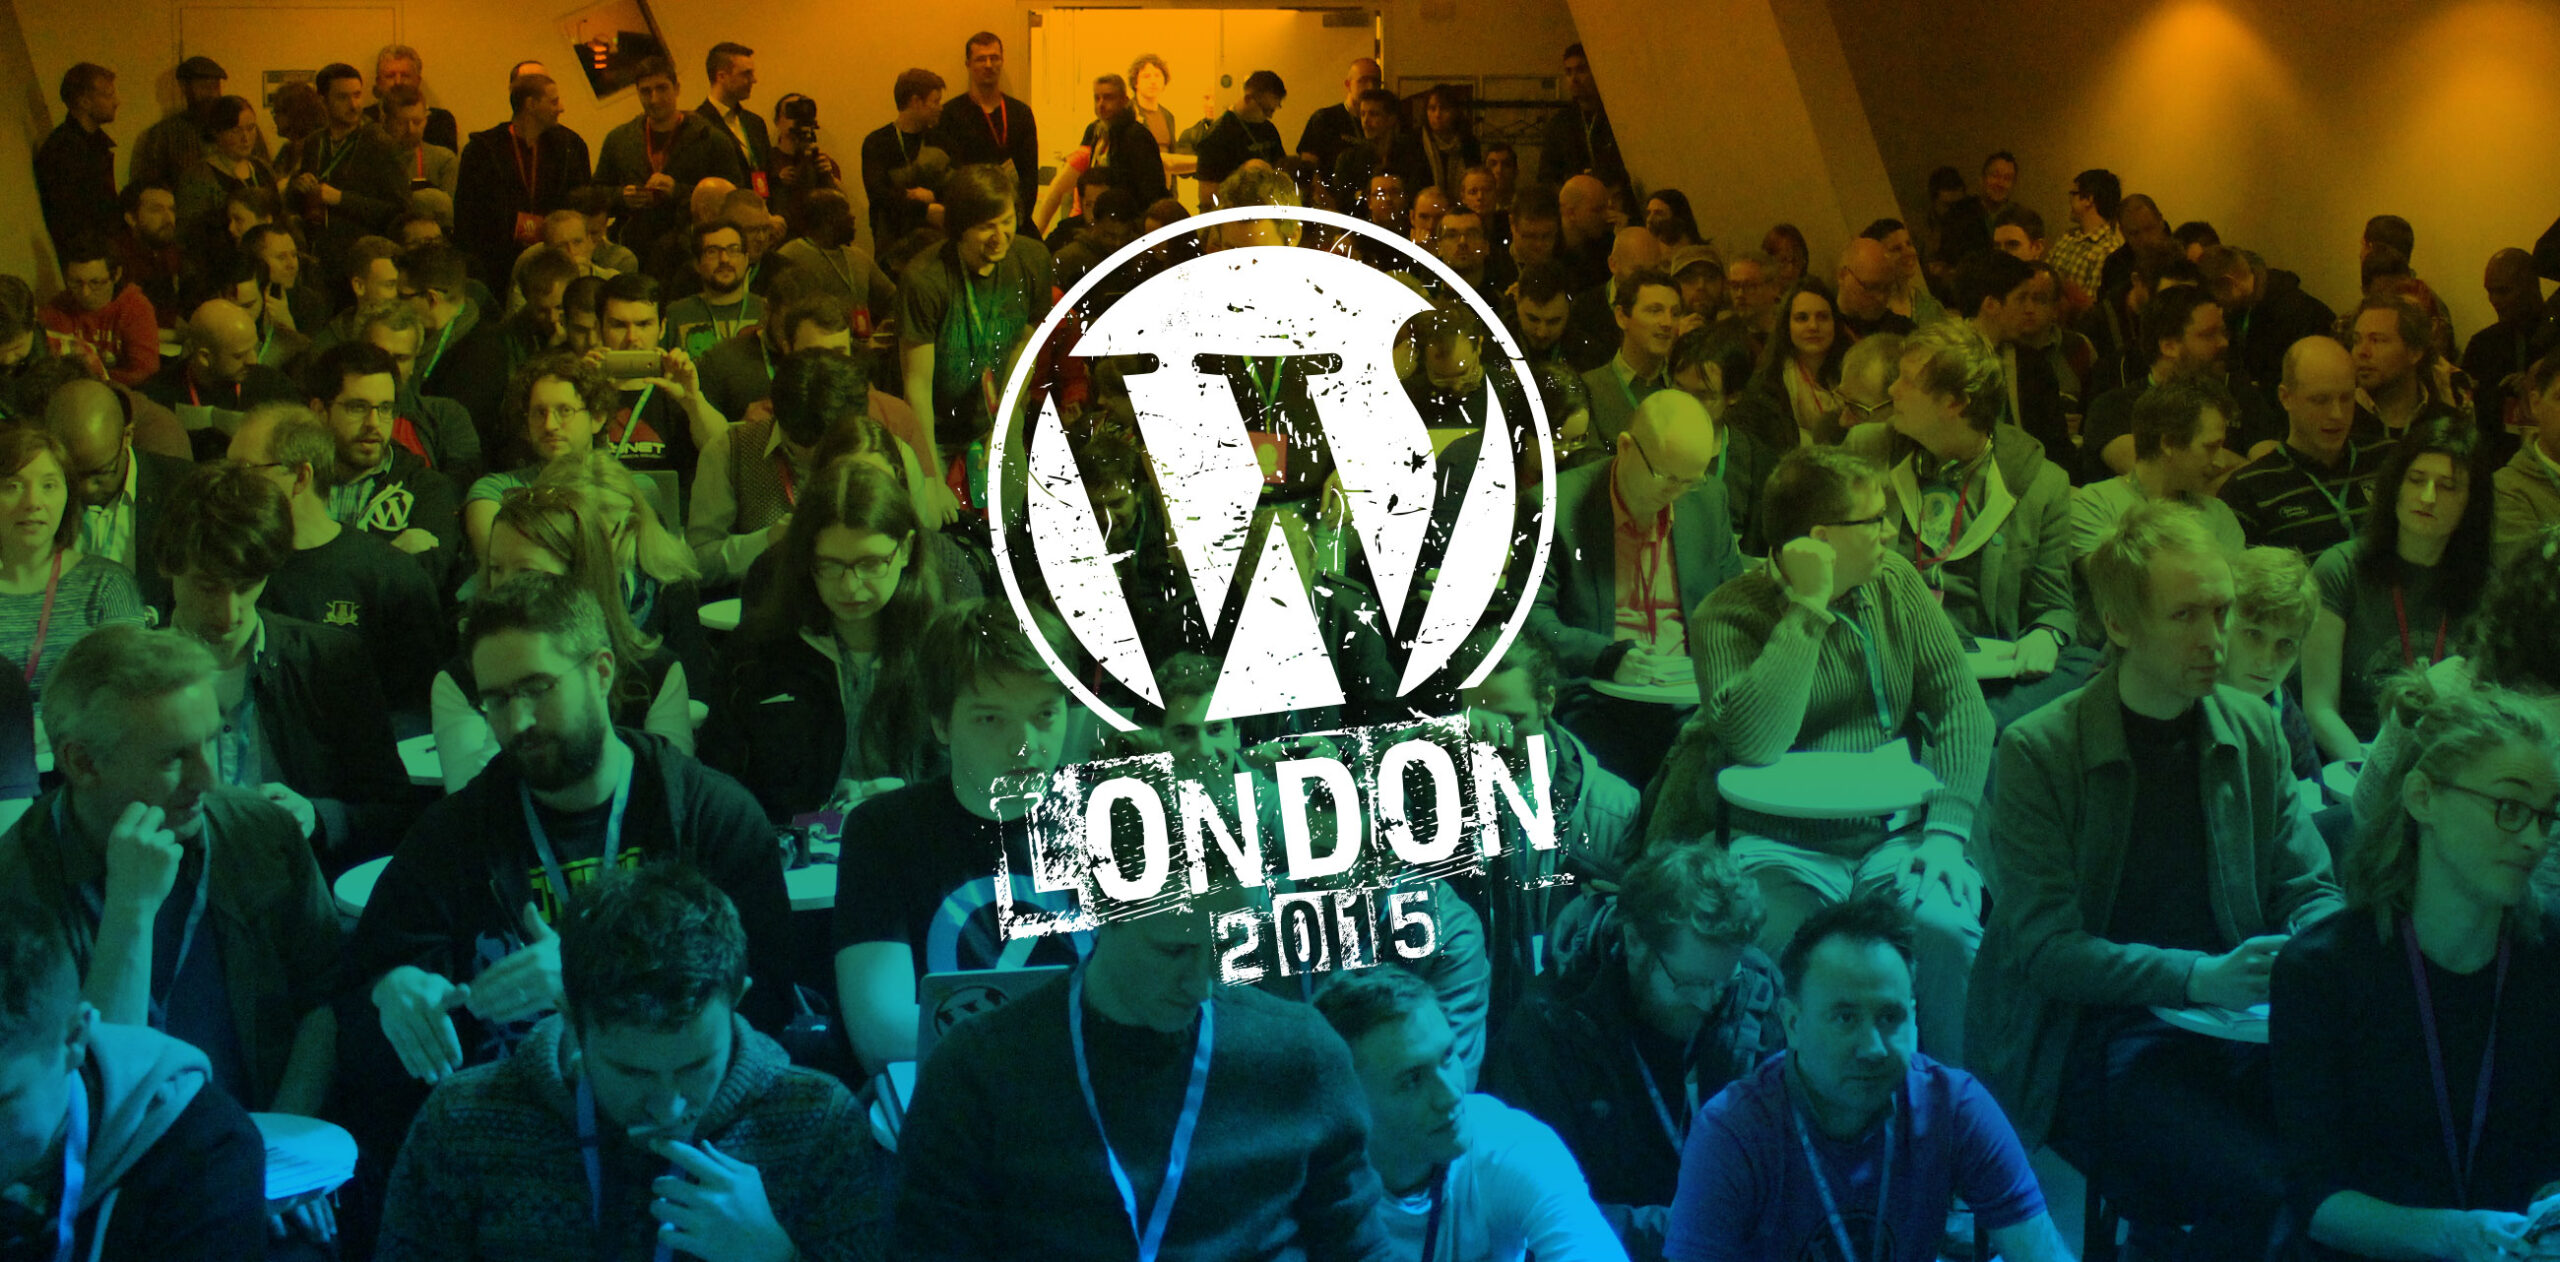 WordCamp London Logo over a blue-green gradient photo of a crowd